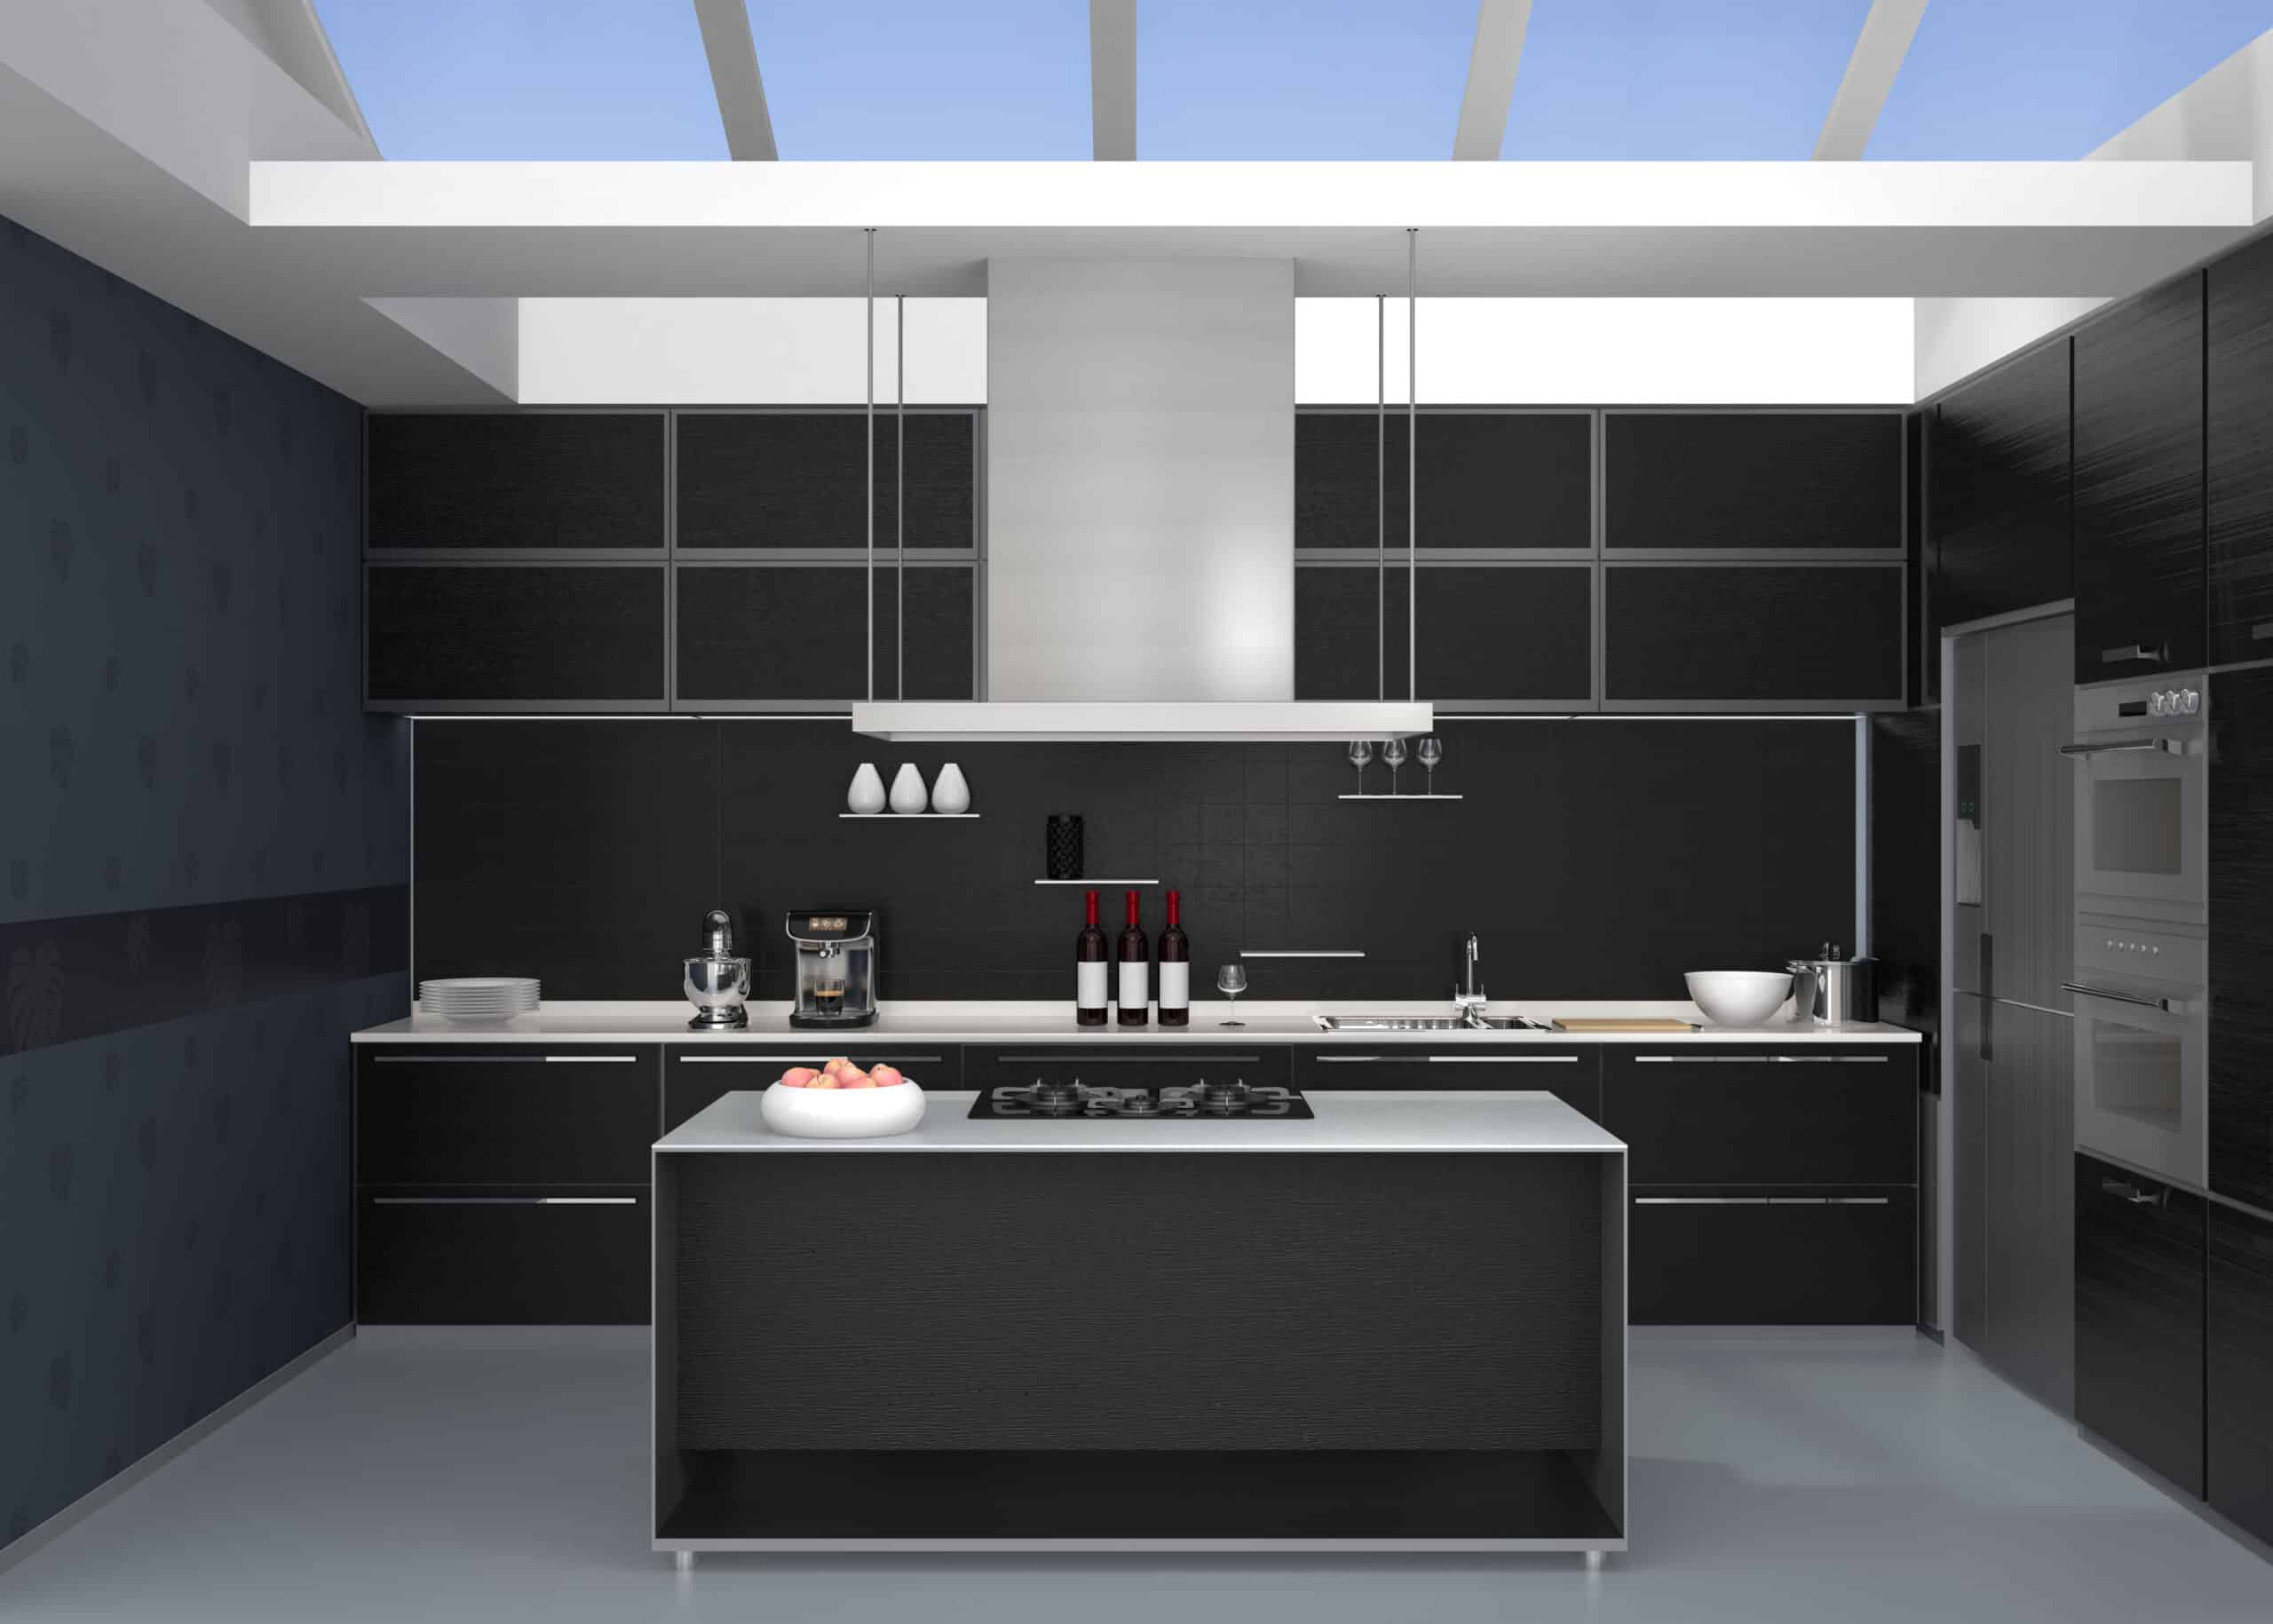 Modern kitchen interior with smart appliances in black color coordination. 3D rendering image.